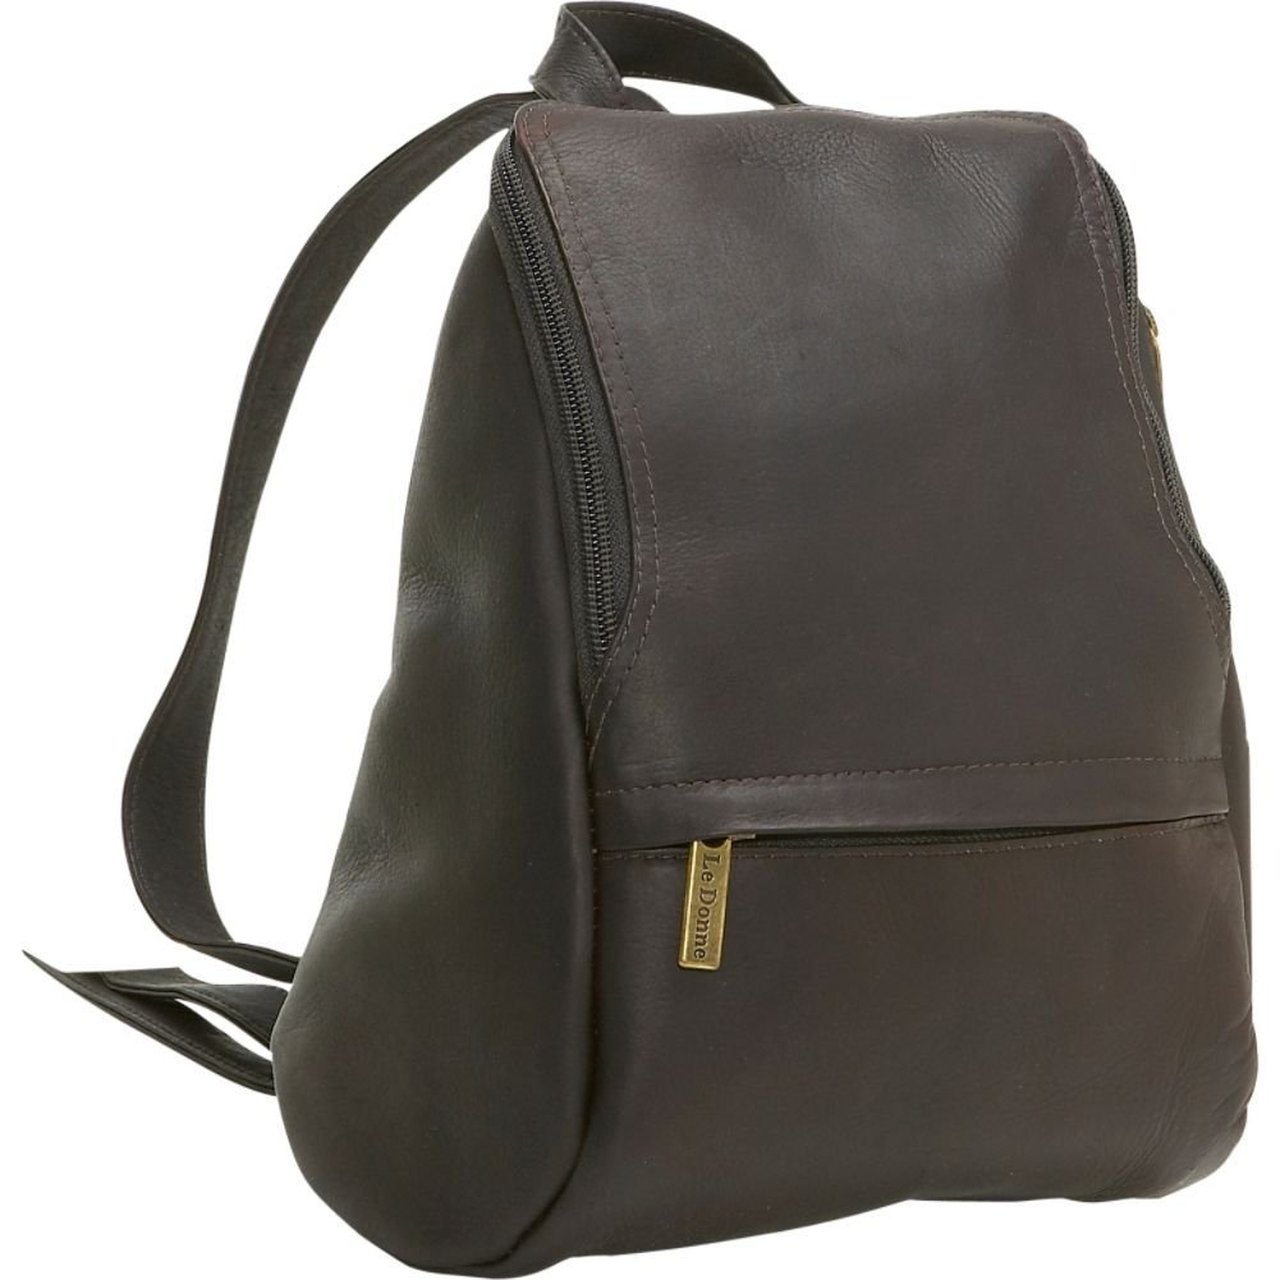 Le Donne Leather U-Zip Mini Backpack LD-030 - image 1 of 5